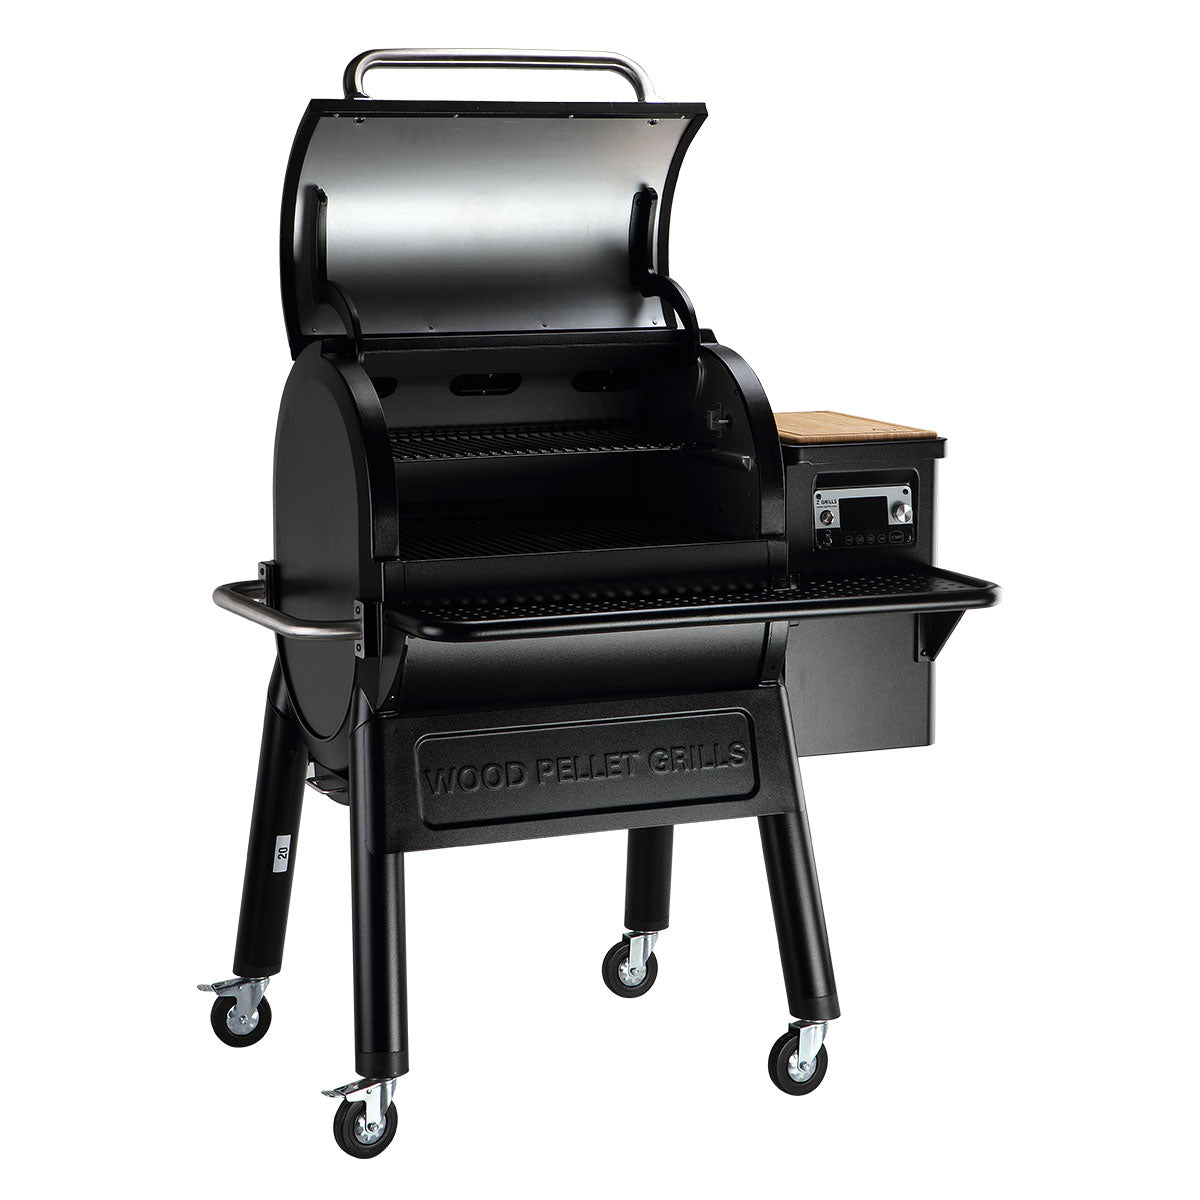 7052B Wood Pellet Grill with Wi-Fi